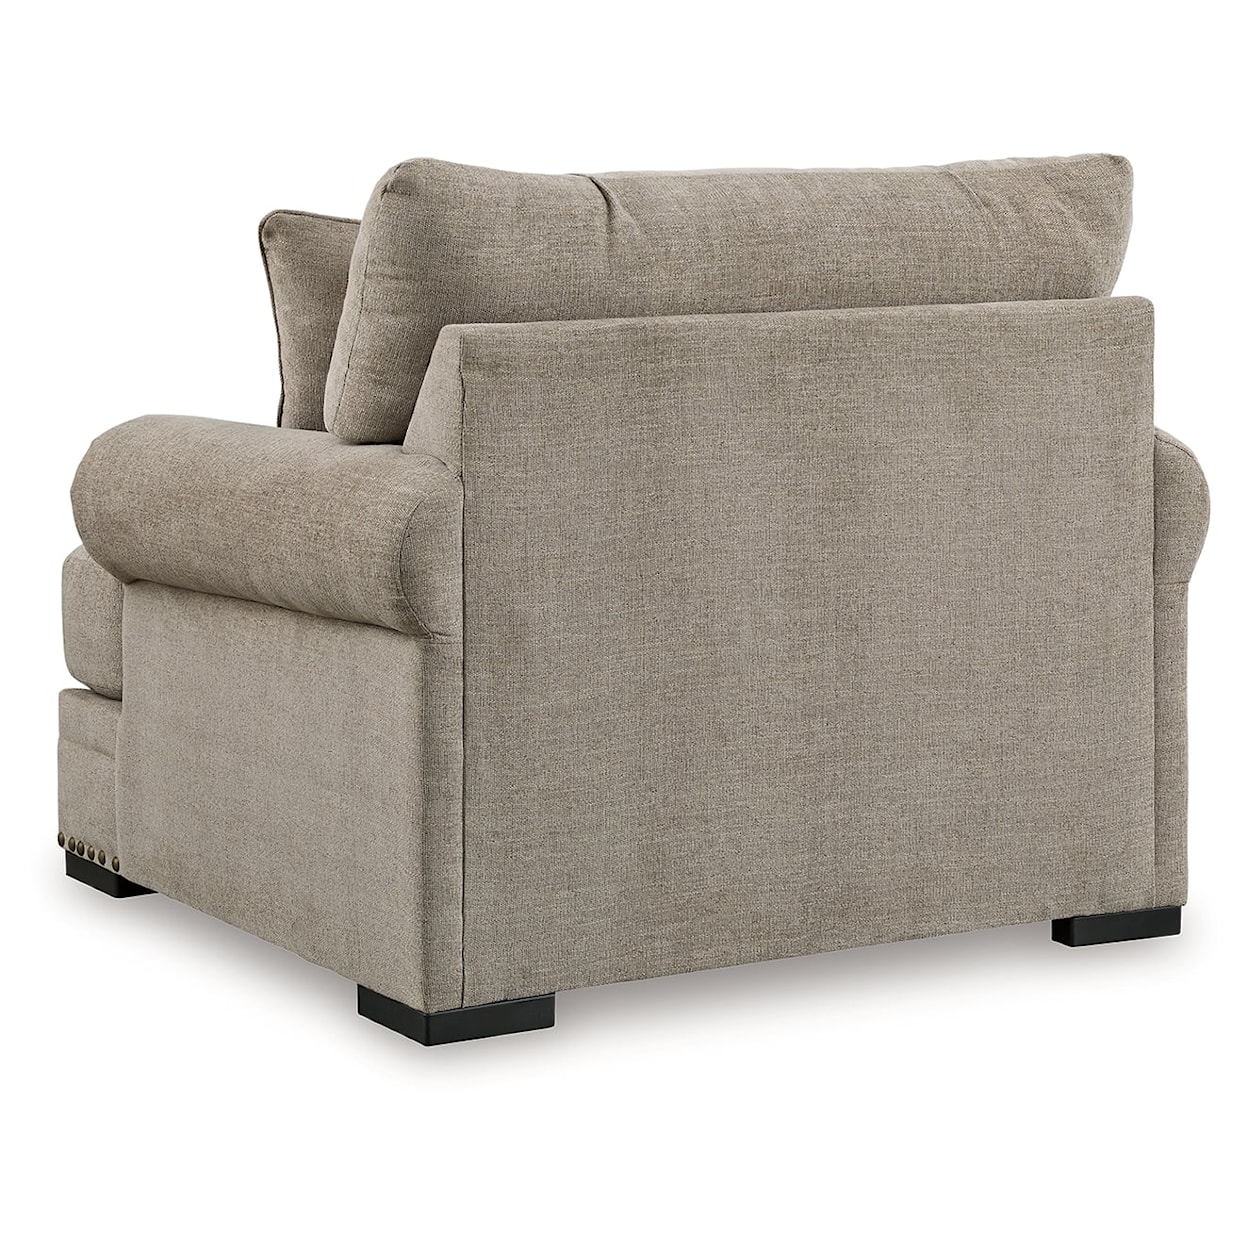 Benchcraft Galemore Oversized Chair And Ottoman